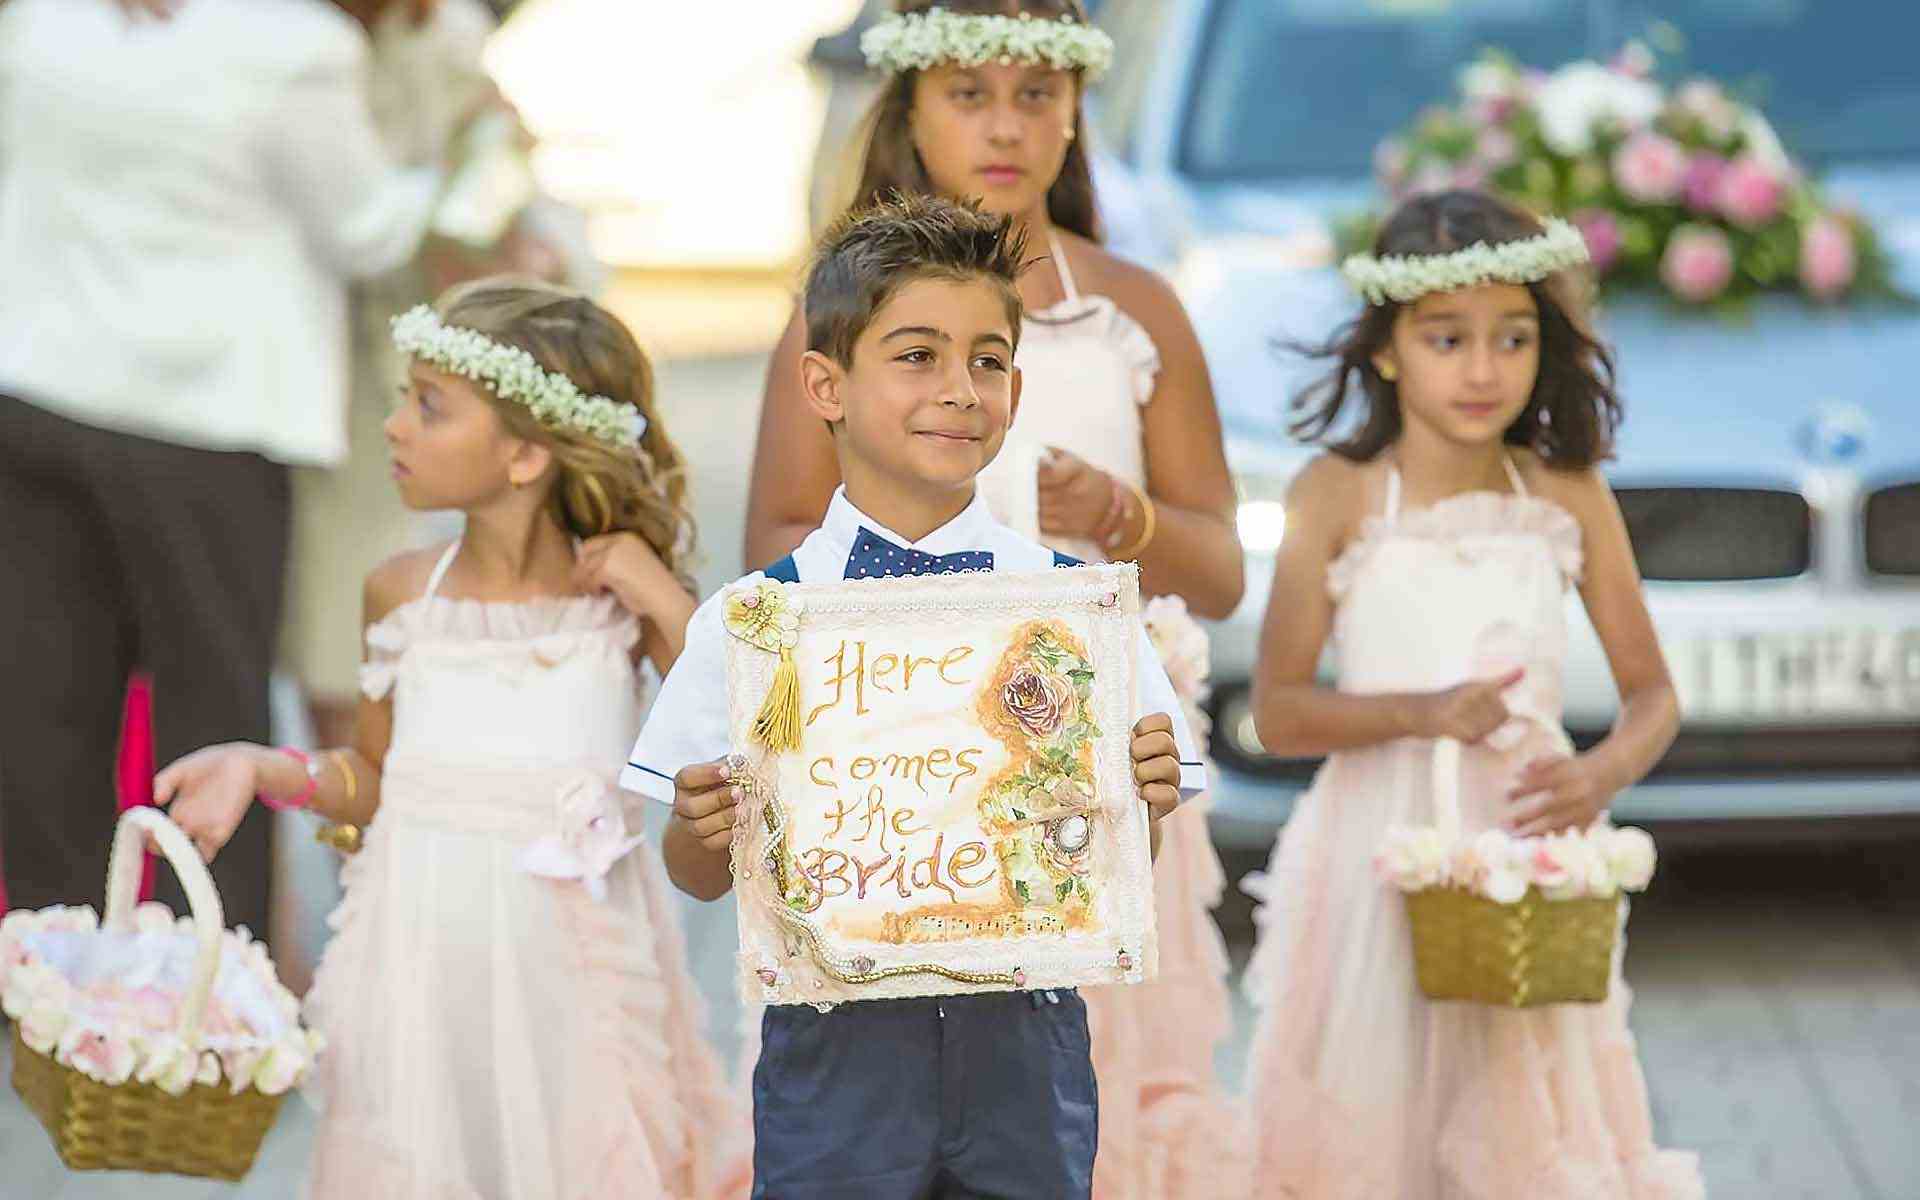 Sweet-Innocence-Ring-Bearer-Boasting-A-Here-Comes-The-Bride-Sign-Flower-Girls-To-Enchant-The-Way-With-Rose-Petals